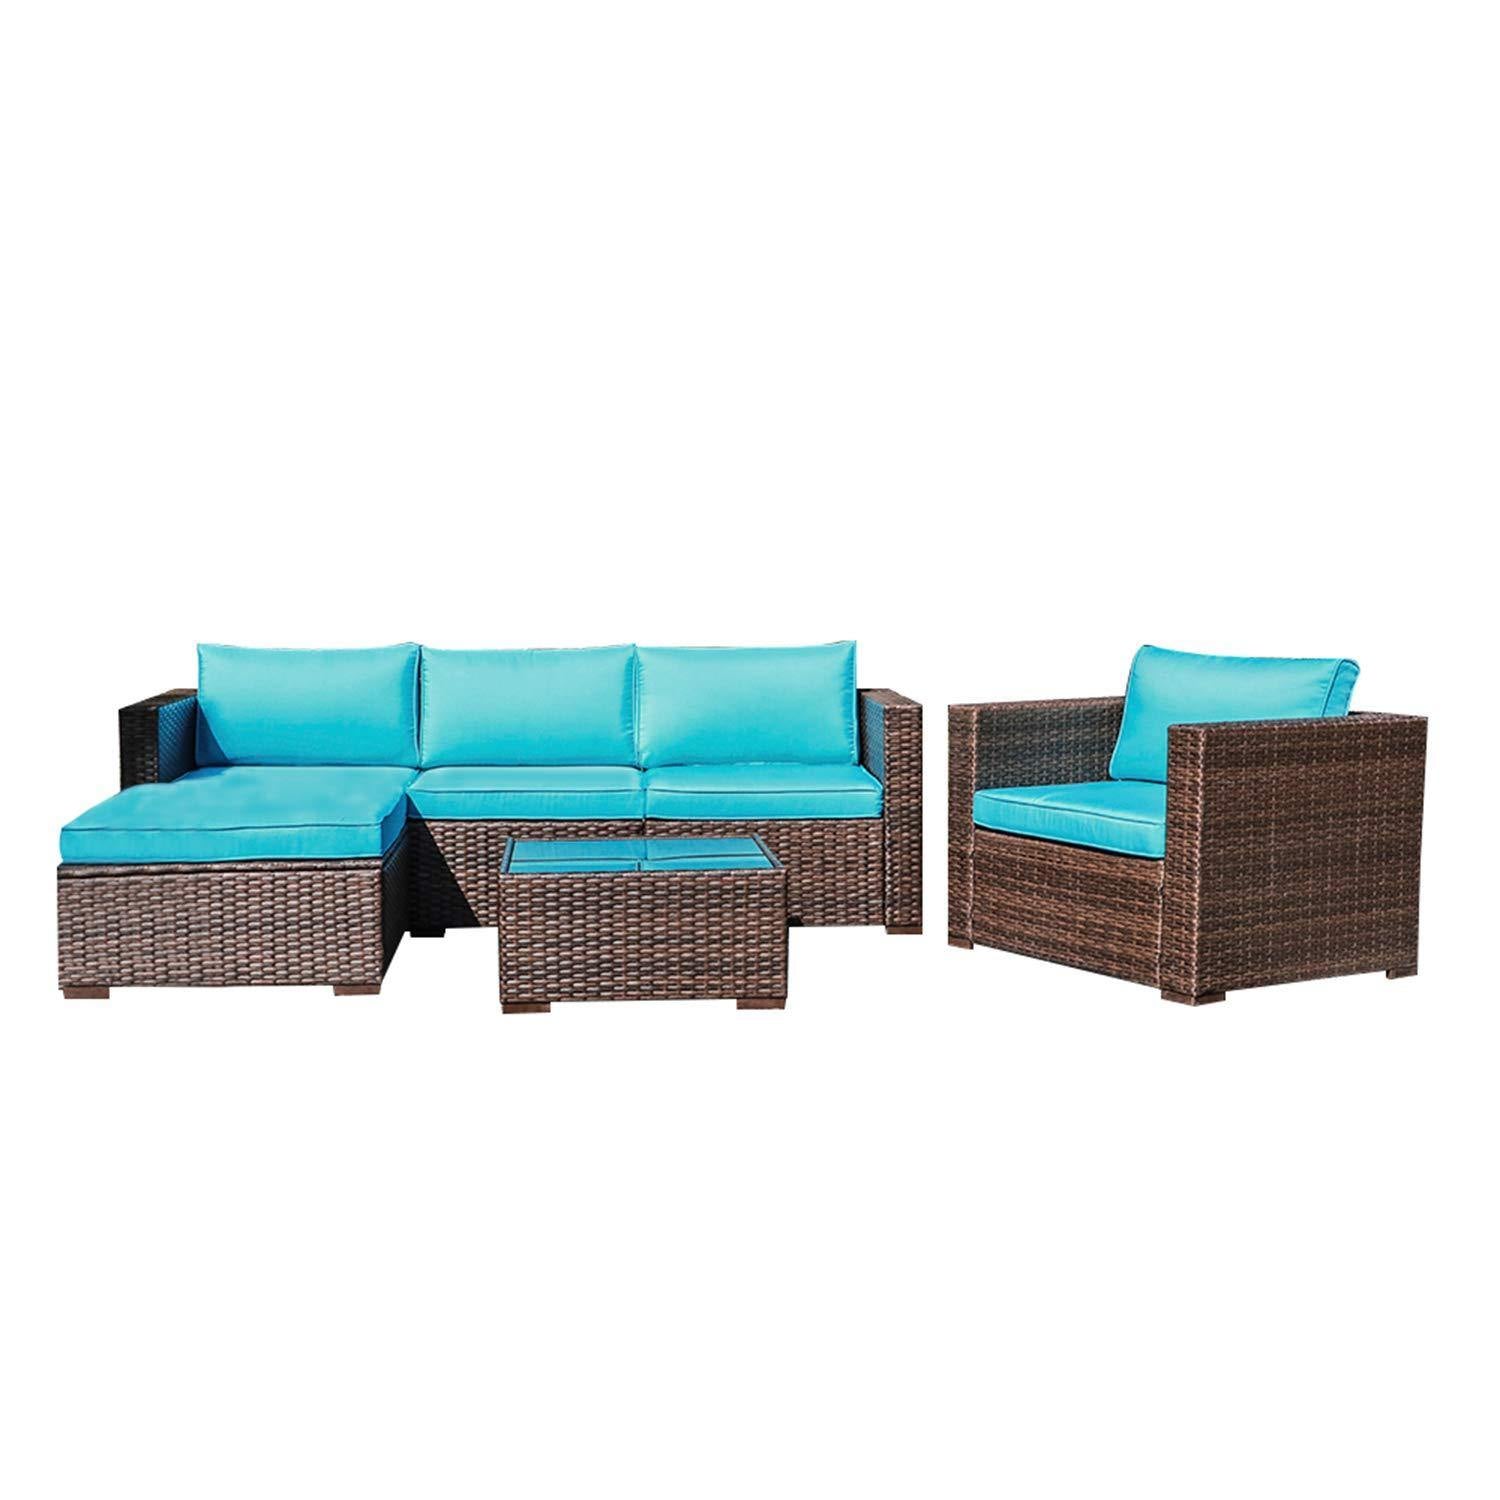 6pcs Outdoor Sectional Set Wicker Modular Patio Sofa with Turquoise Cushions | Orange-Casual